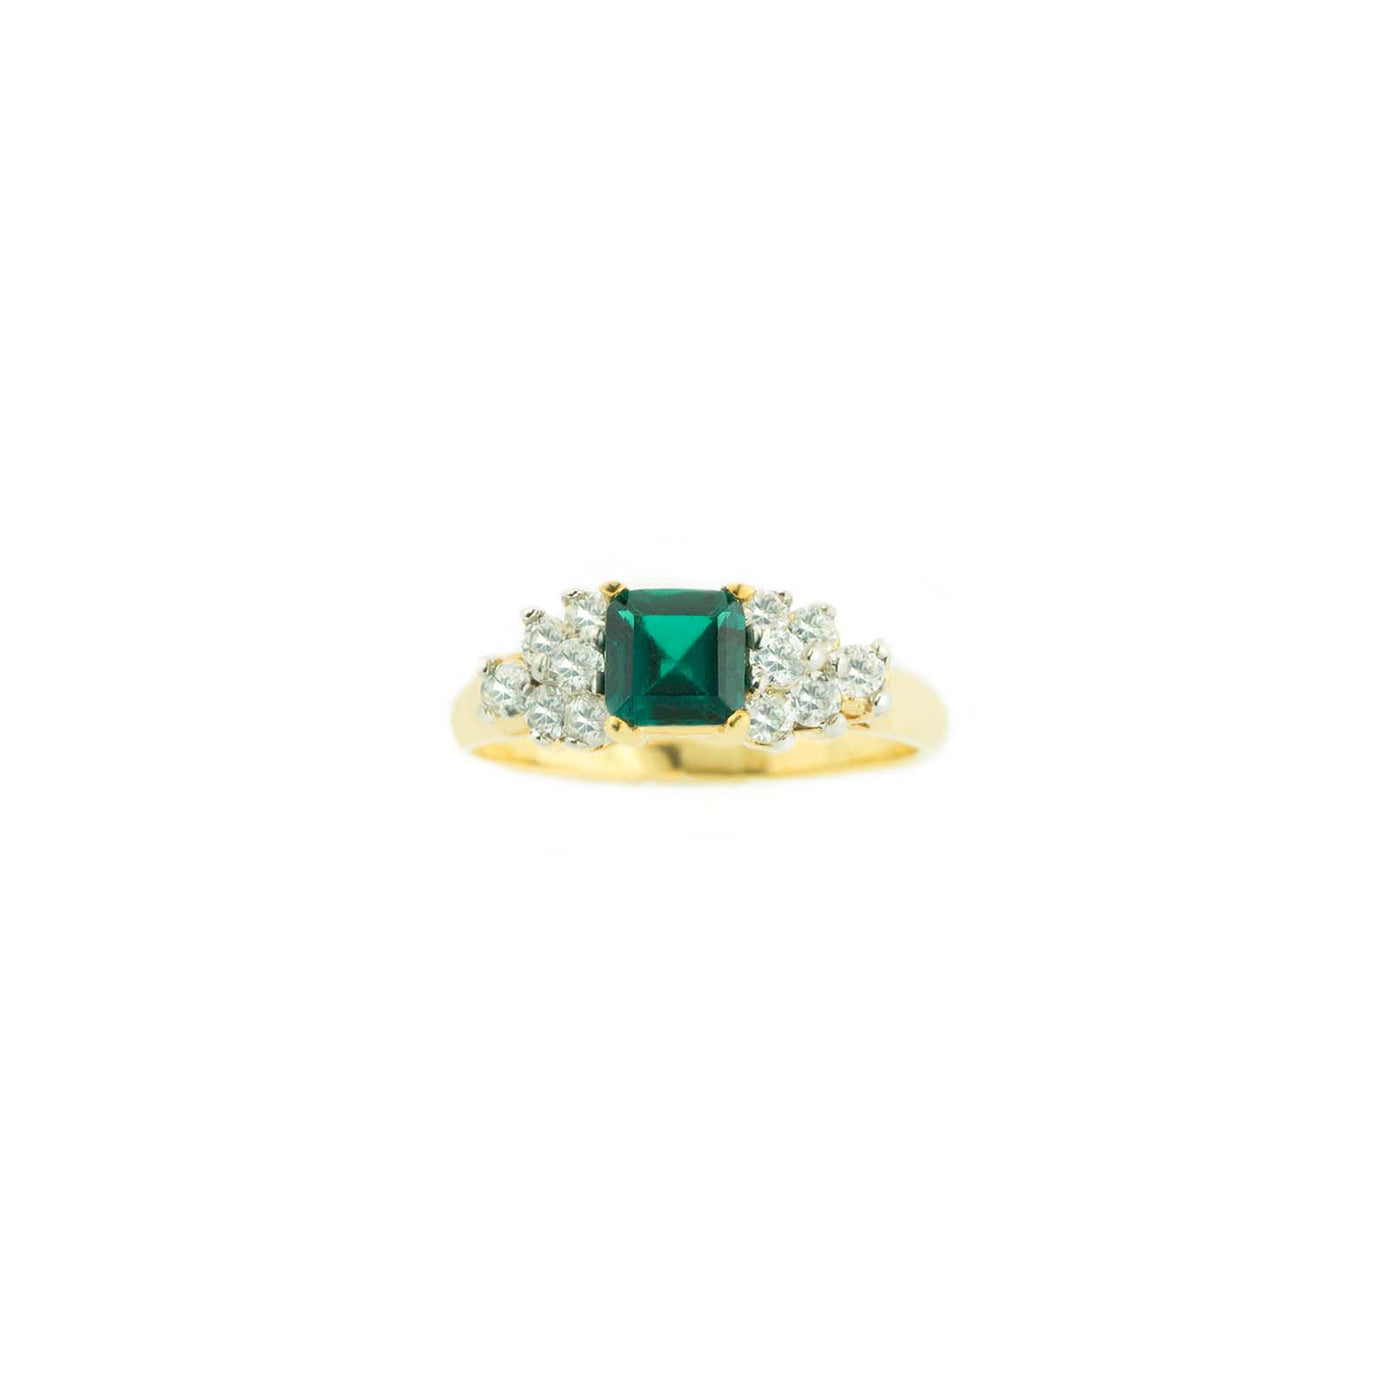 emerald ring, emerald solitaire ring, emerald engagement ring, emerald rings, floral ring, may birthstone, birthstone for may, cut emerald, gjfl, gems and jewels